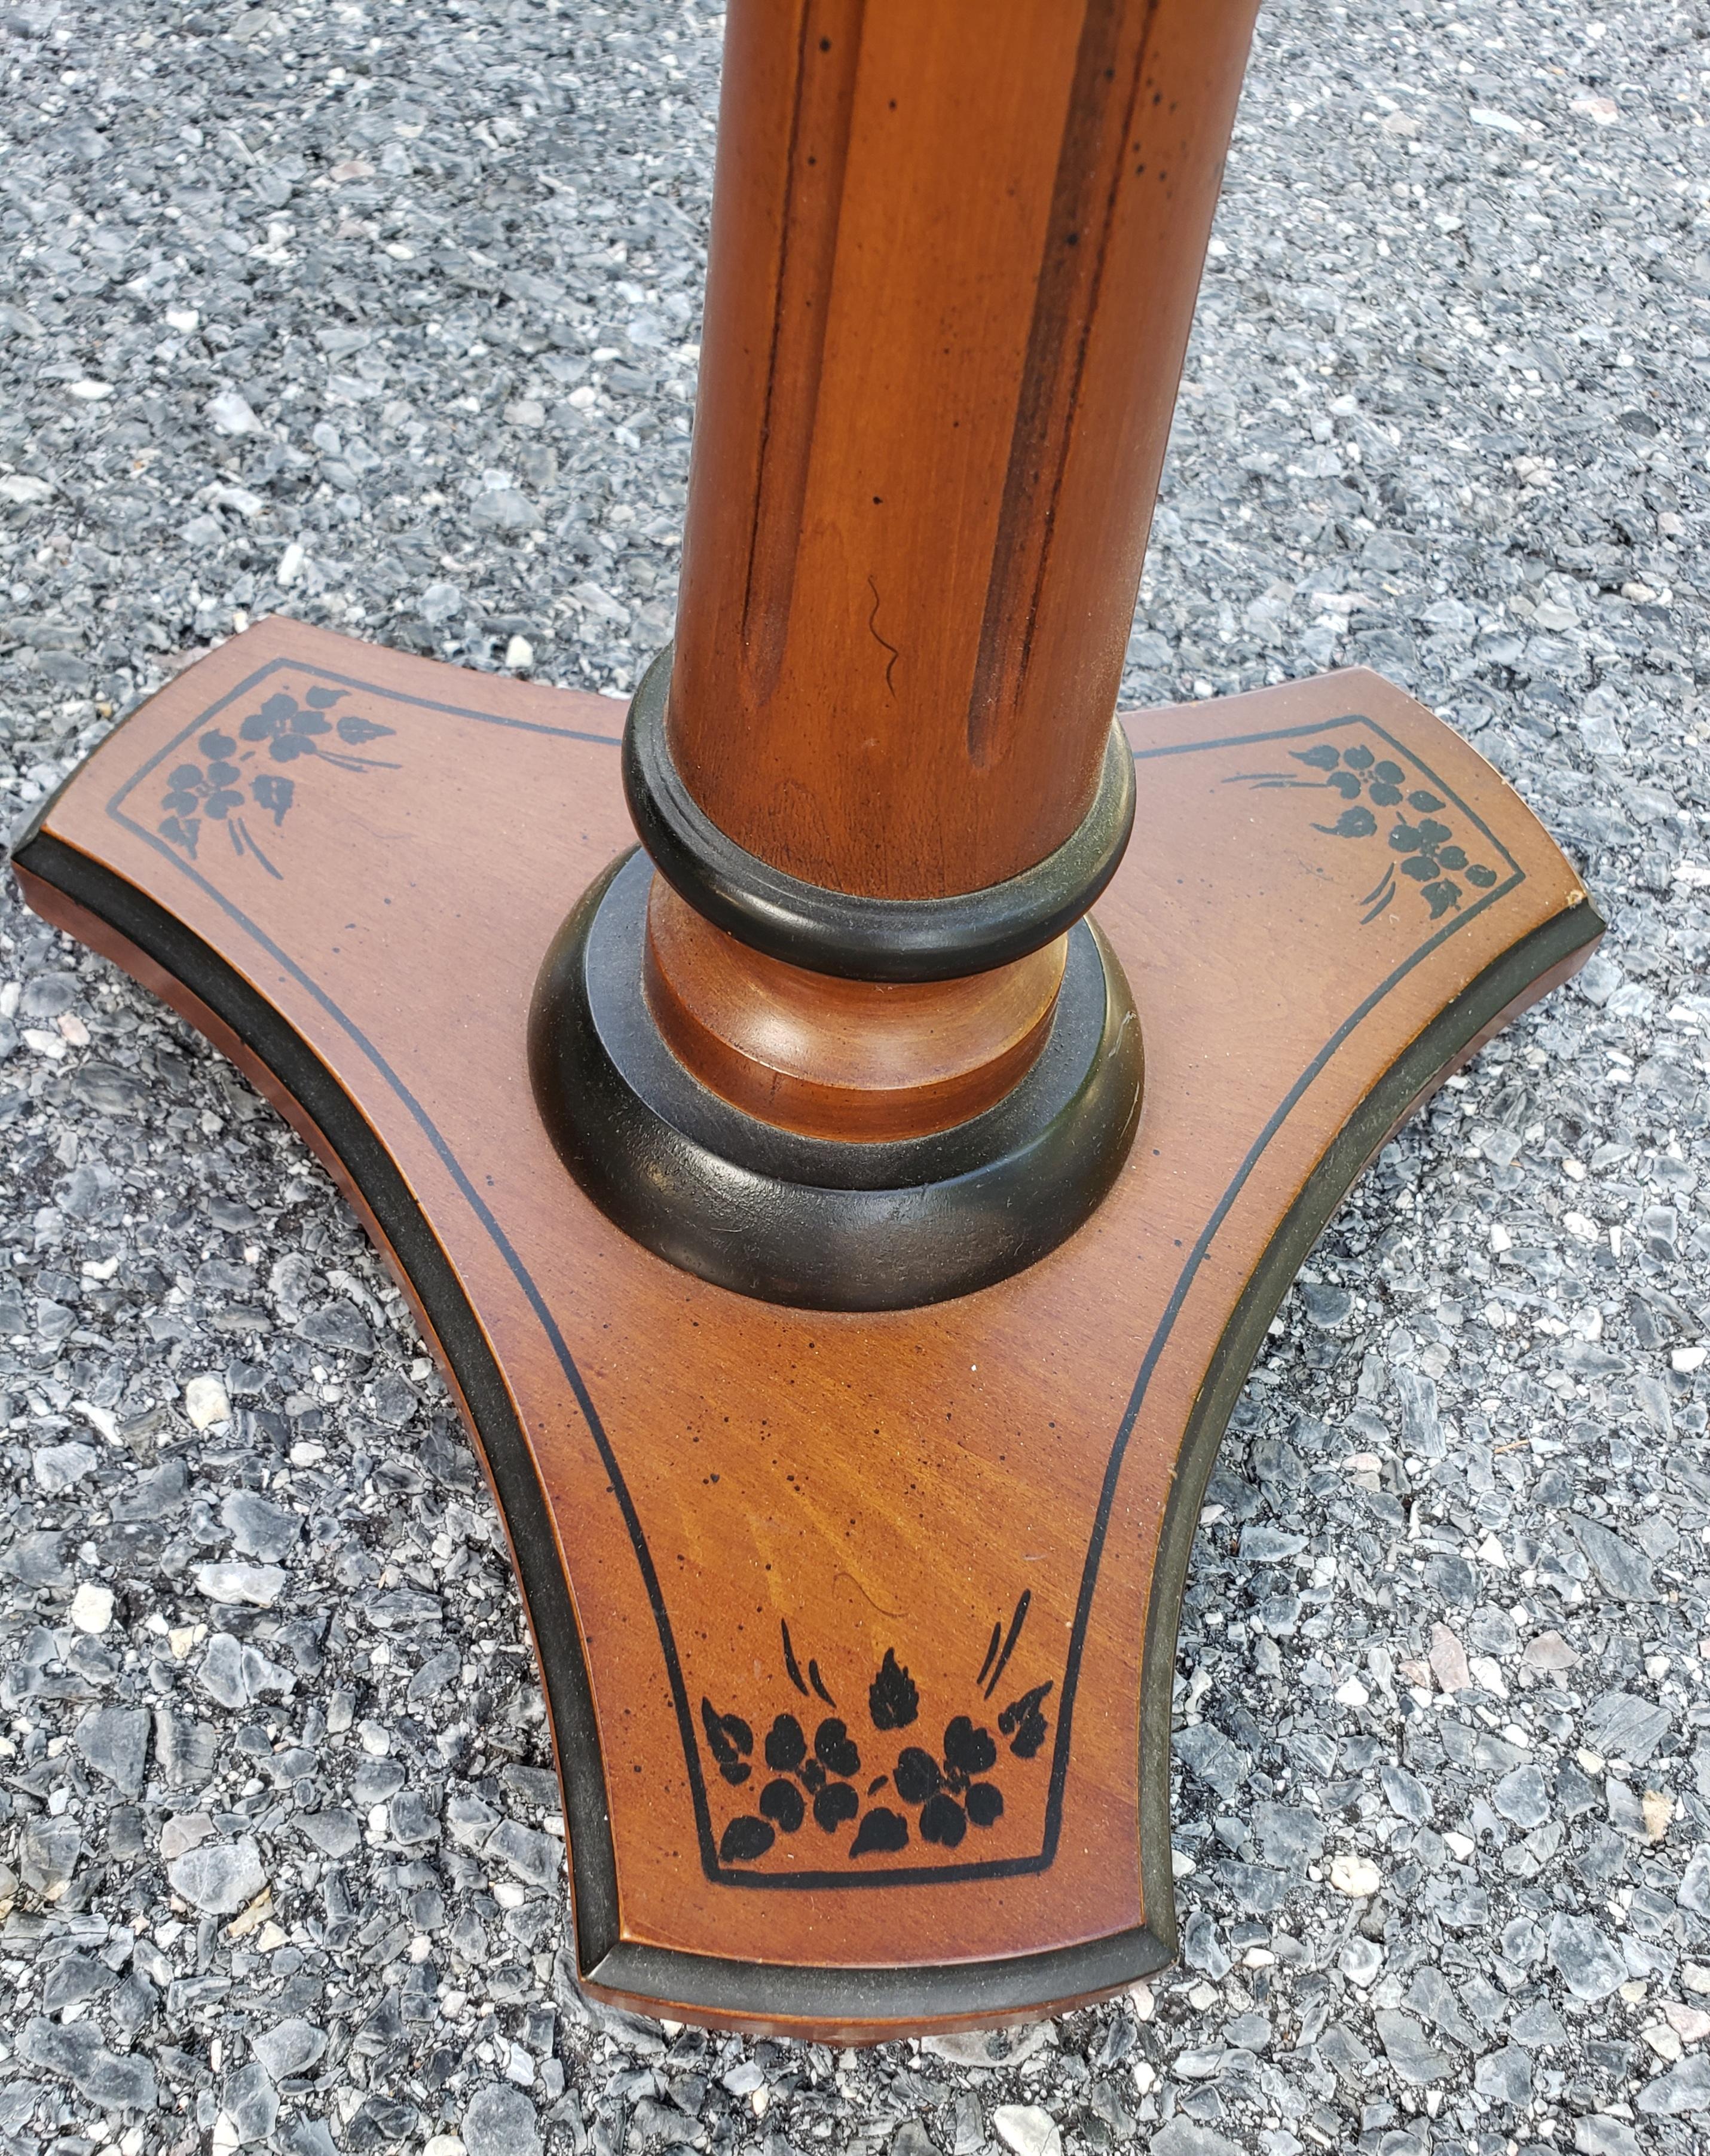 Late 20th Century  Pedestal Walnut Candle Stand with Brass Tray Insert

Measures 12.75